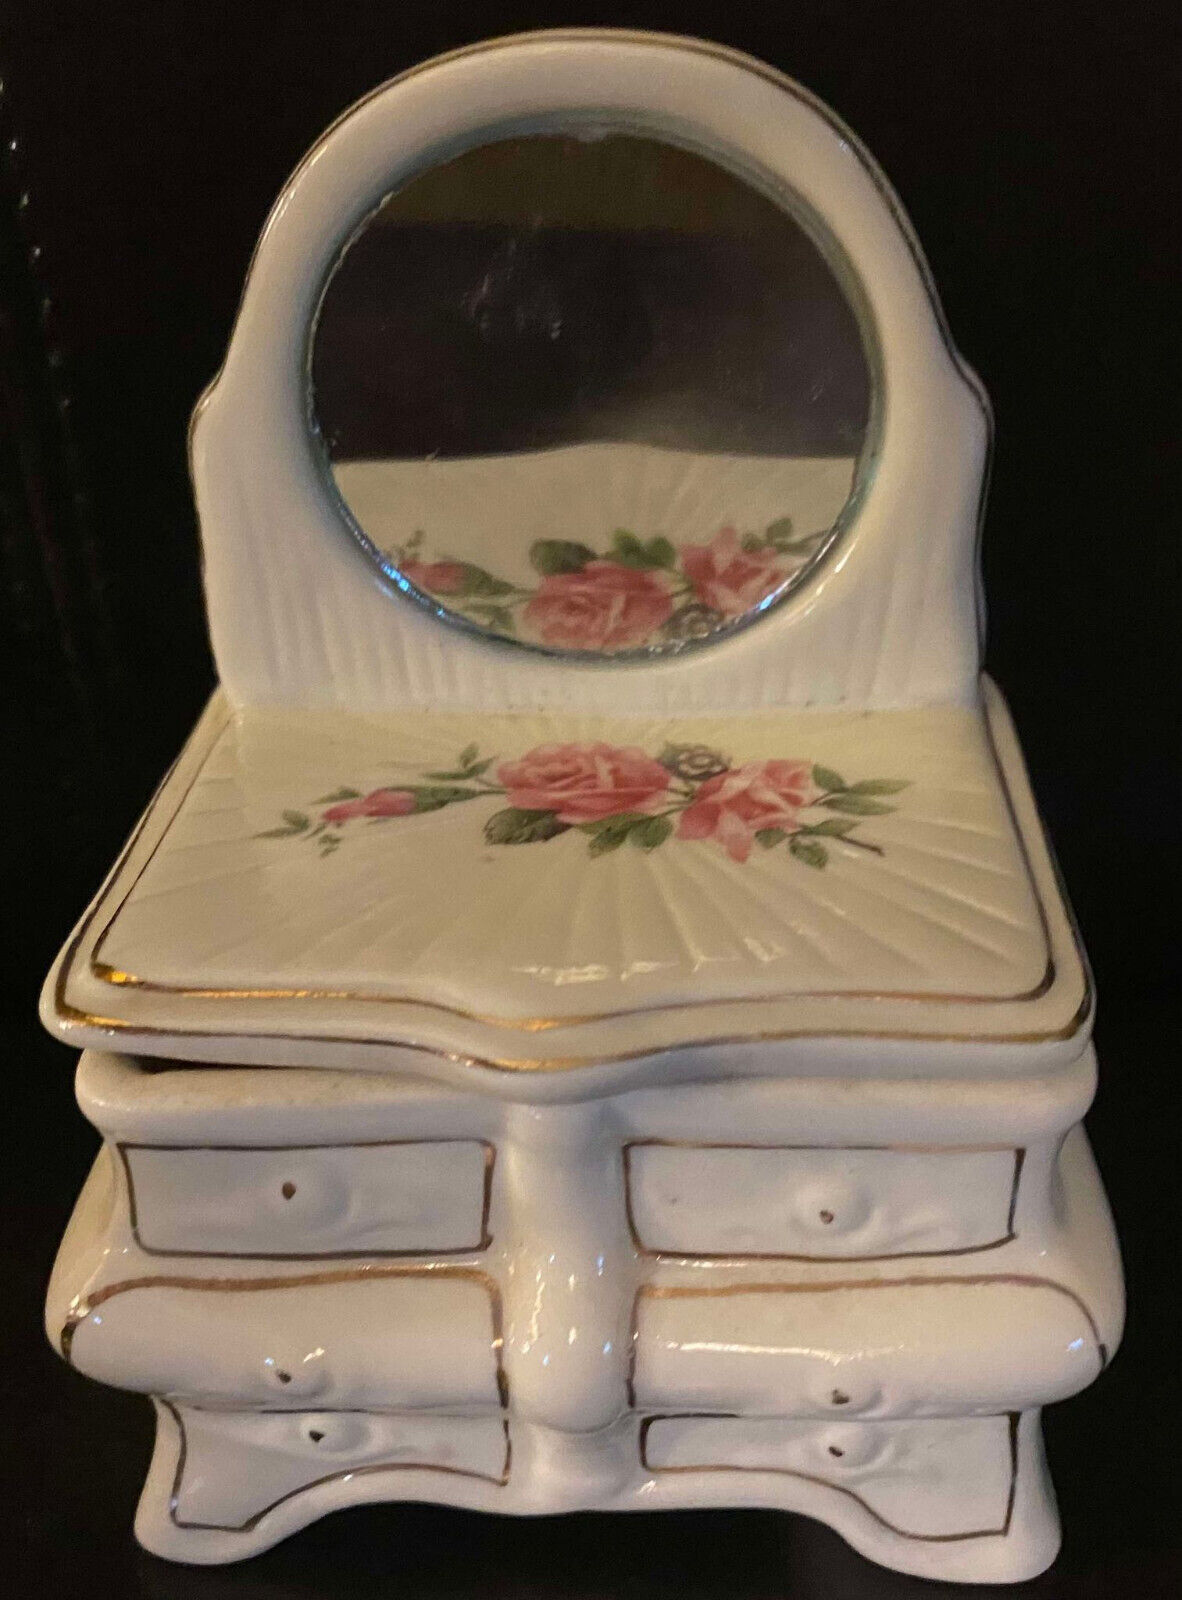 Vintage Victorian Ceramic Jewelry Box Dresser With Mirror, and Pink Rose Design